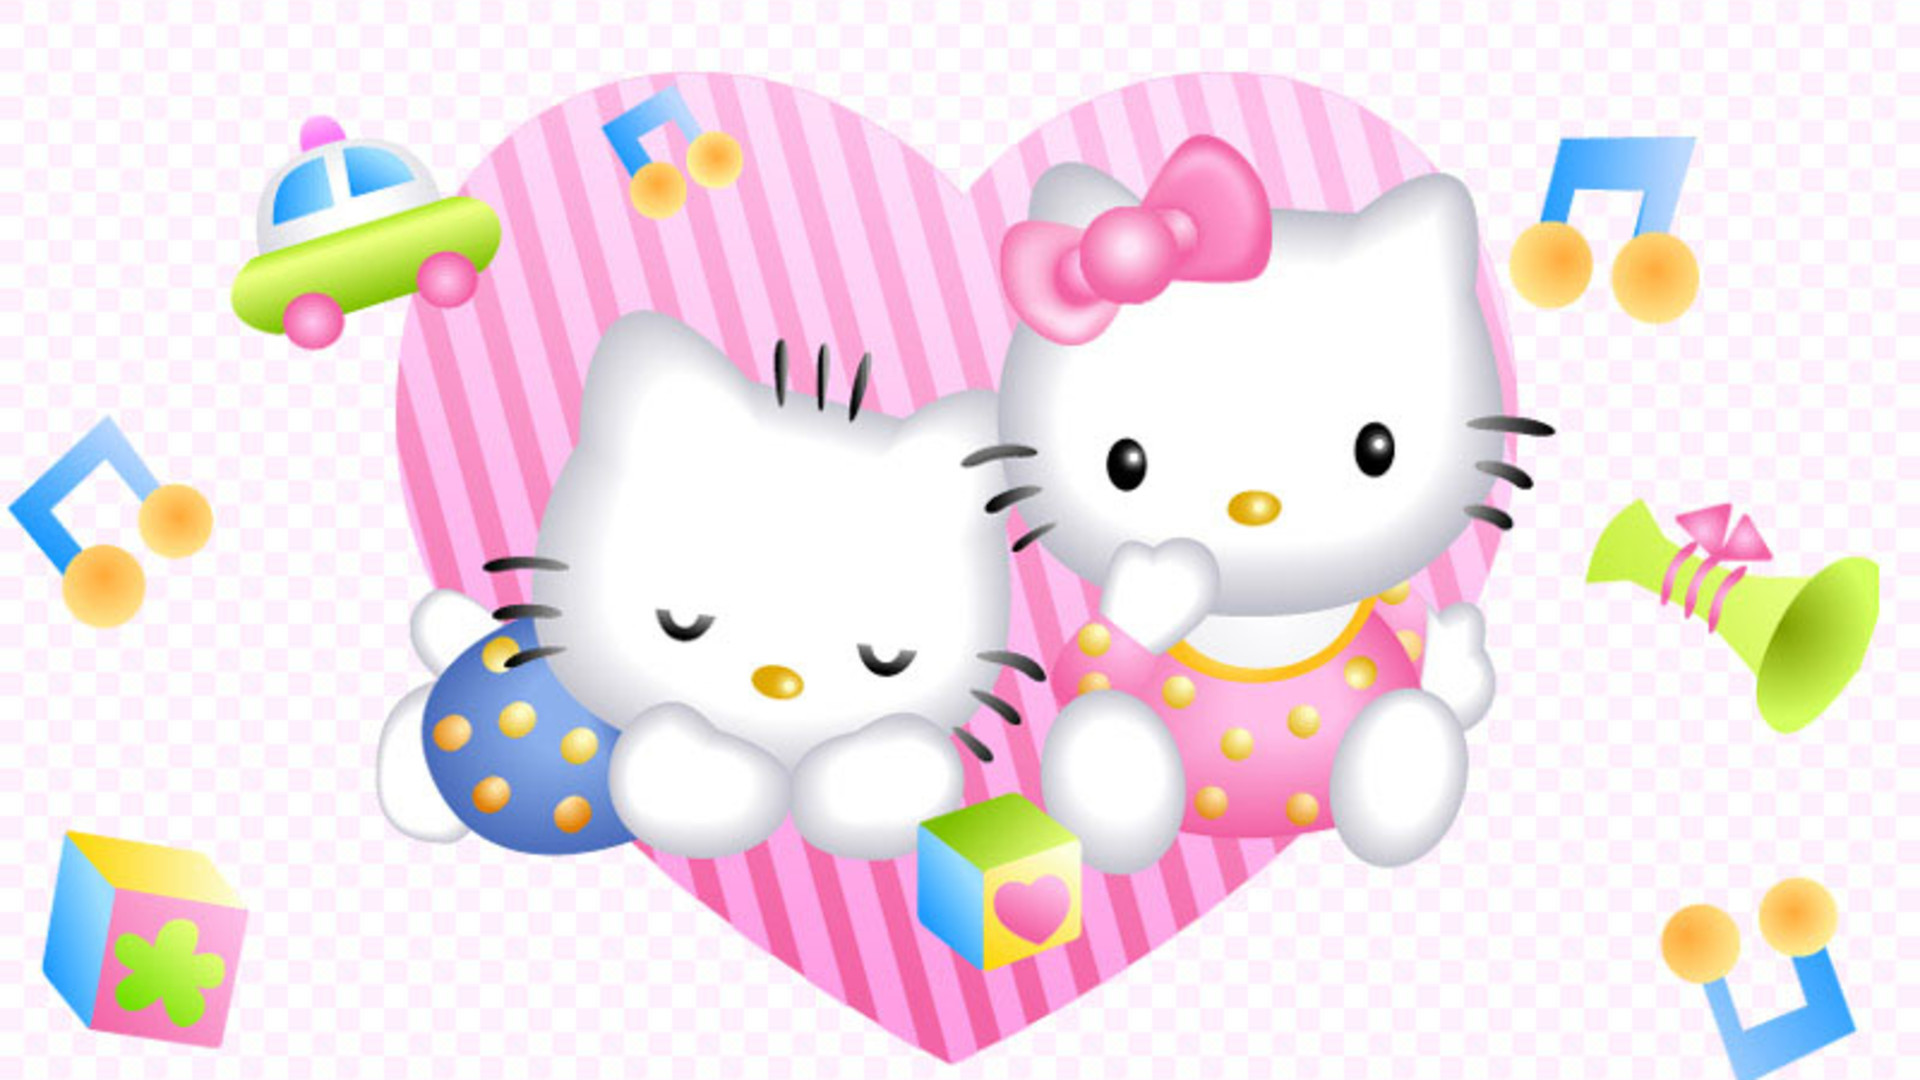 HD a hello kitty christmas wallpapers  Peakpx